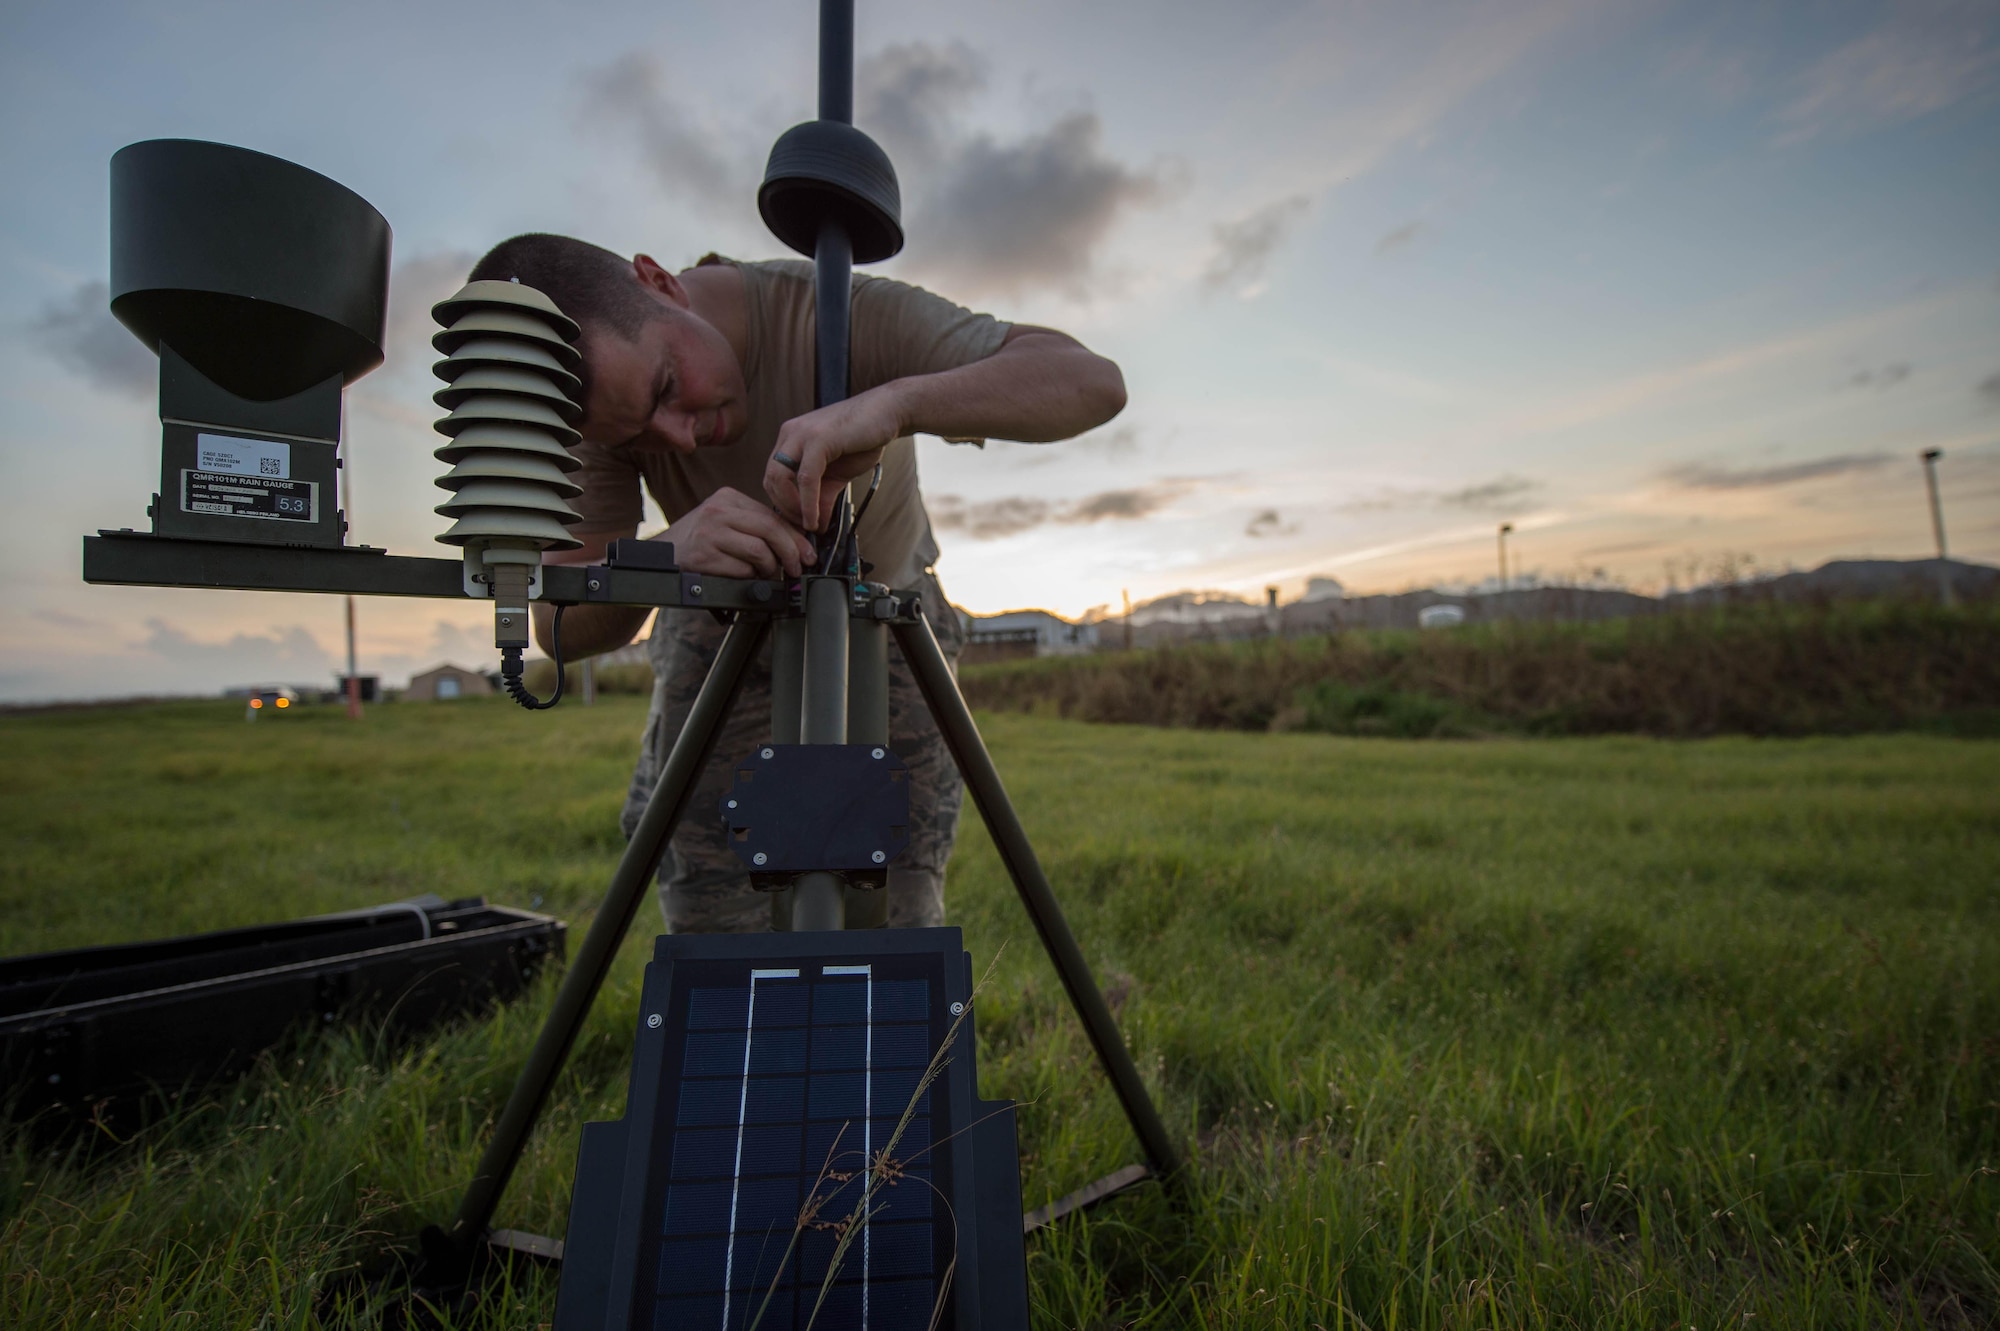 Tech. Sgt. Brian Thompkins, 921st Contingency Response Squadron weather forecaster, sets up a Tactical Airfield Weather Center at Roosevelt Roads, Puerto Rico, Sept. 25, 2017. A 70 member contingency response element from the 821st Contingency Response Group stationed at Travis Air Force Base, Calif., deployed to Puerto Rico in support of Hurricane Maria relief efforts. (U.S. Air Force photo by Staff Sgt. Robert Hicks)